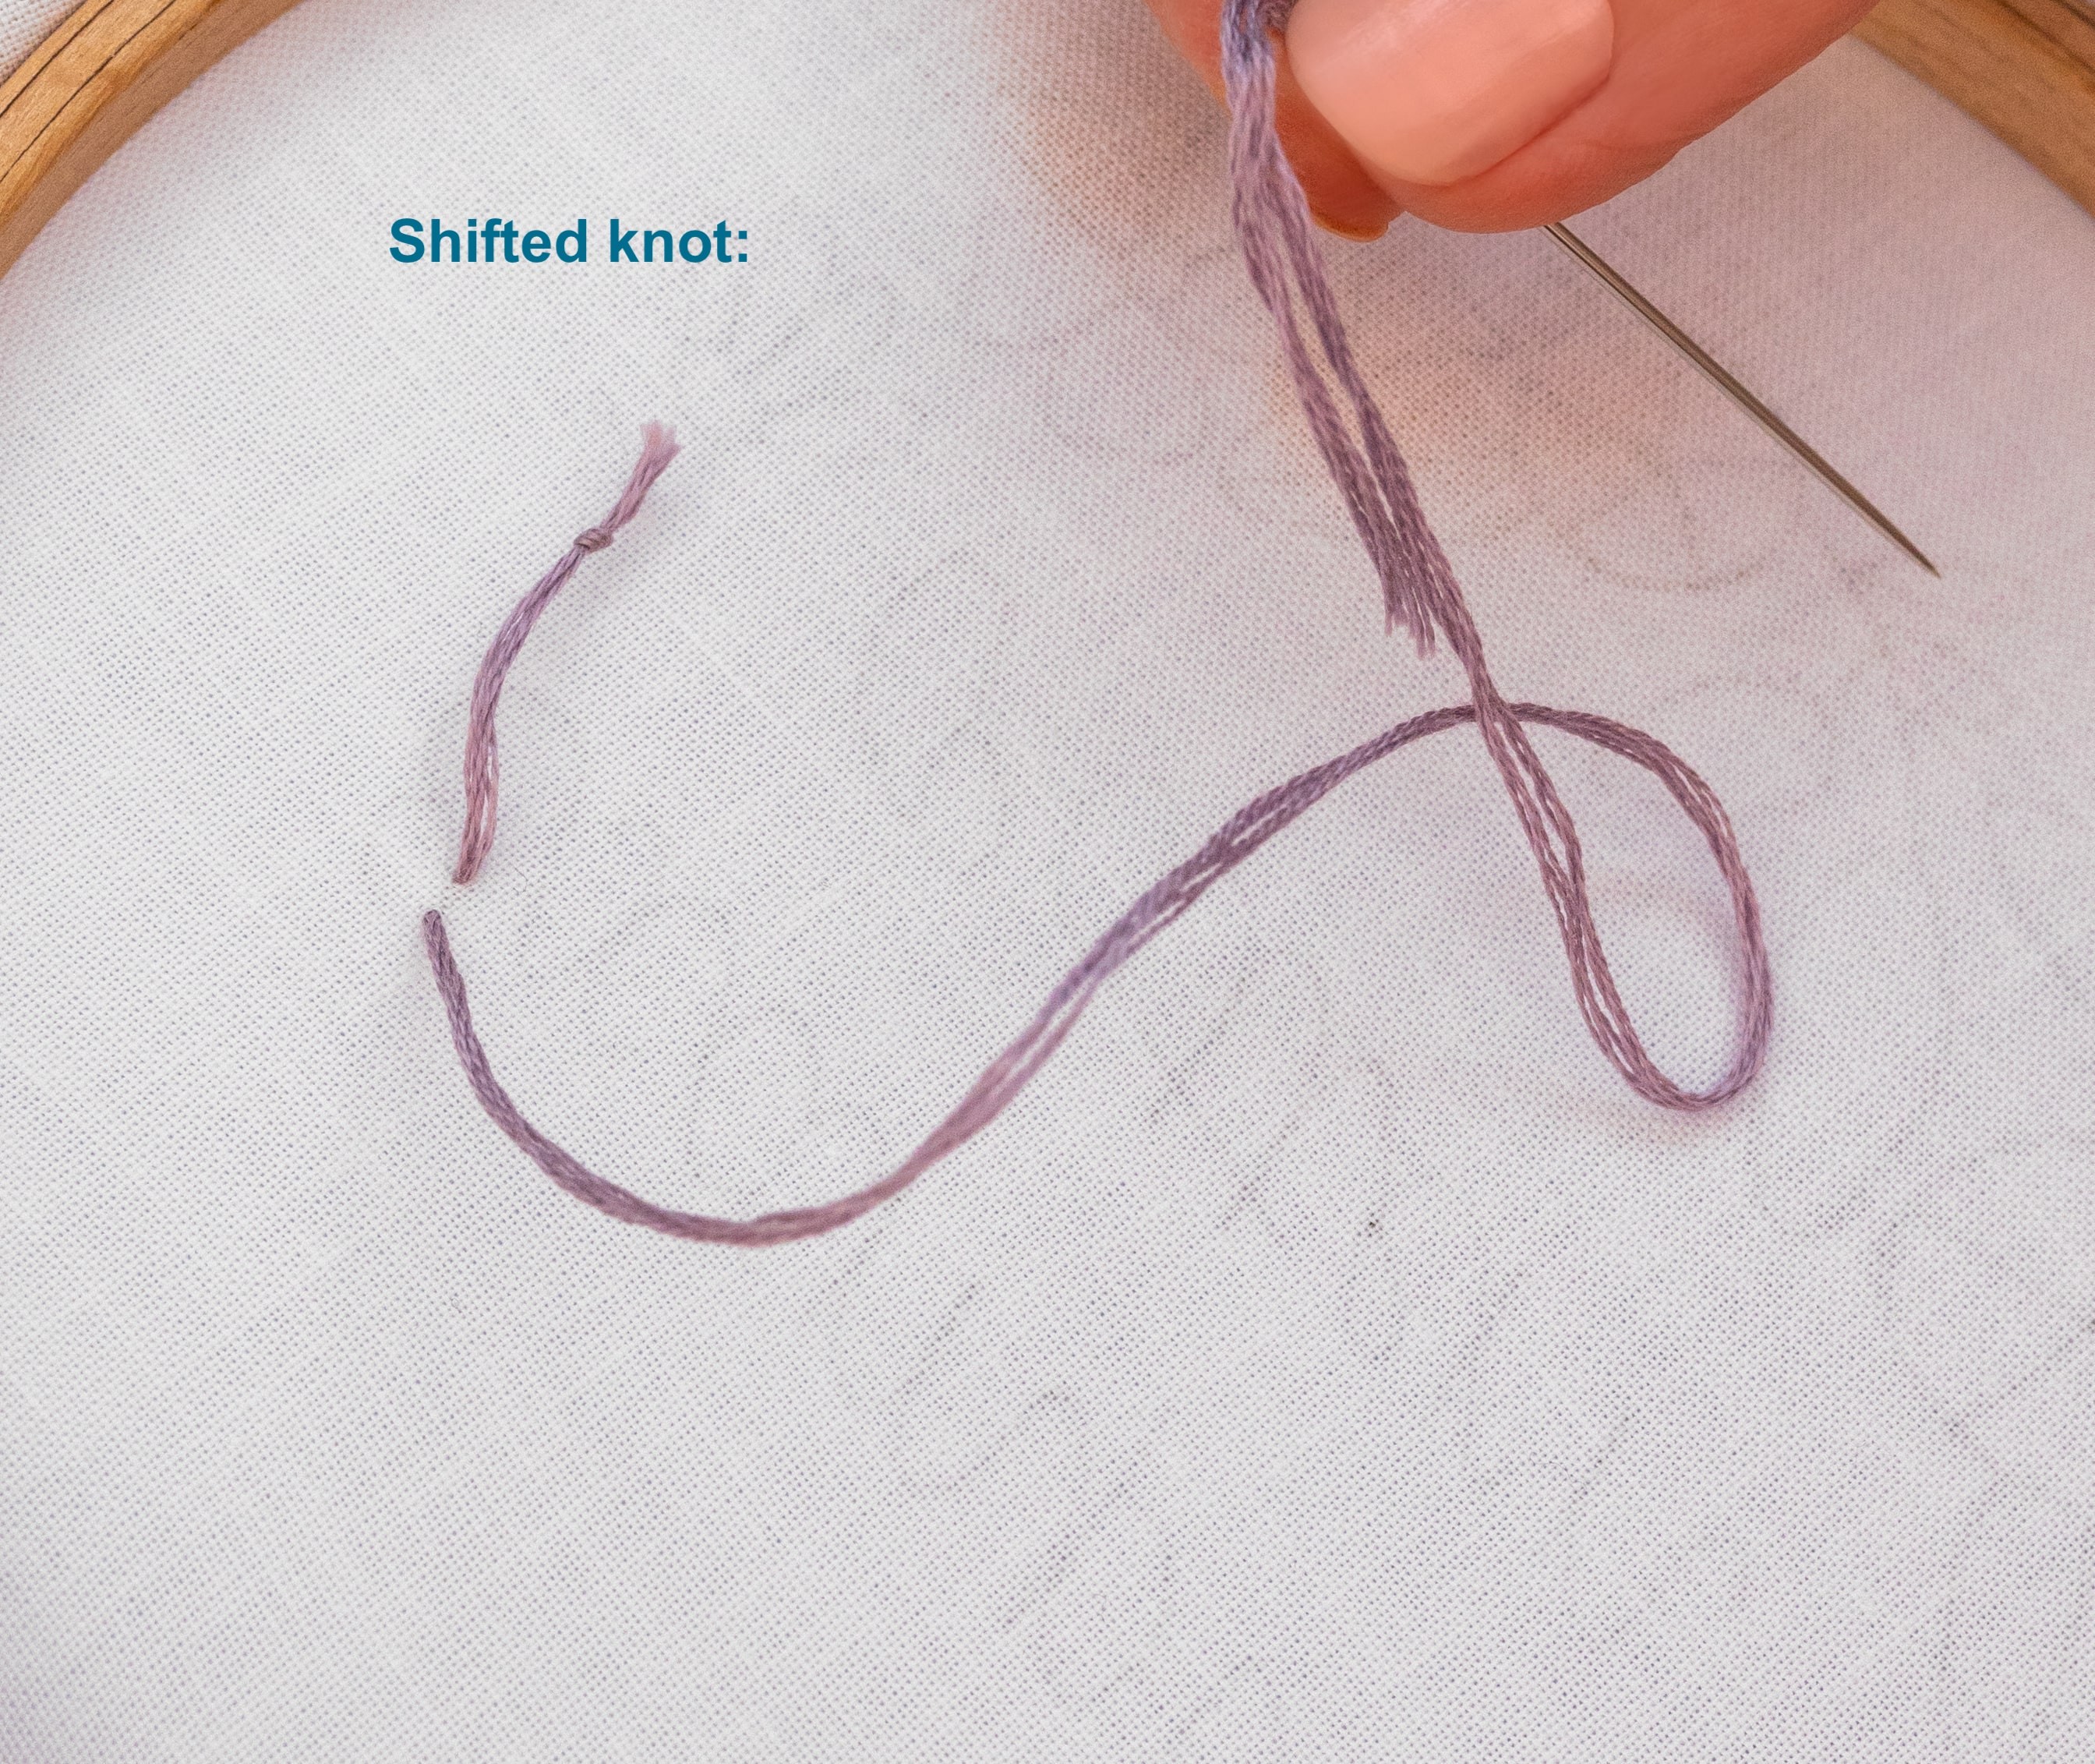 This is an image of a shifted knot at the back of an embroidery pattern.